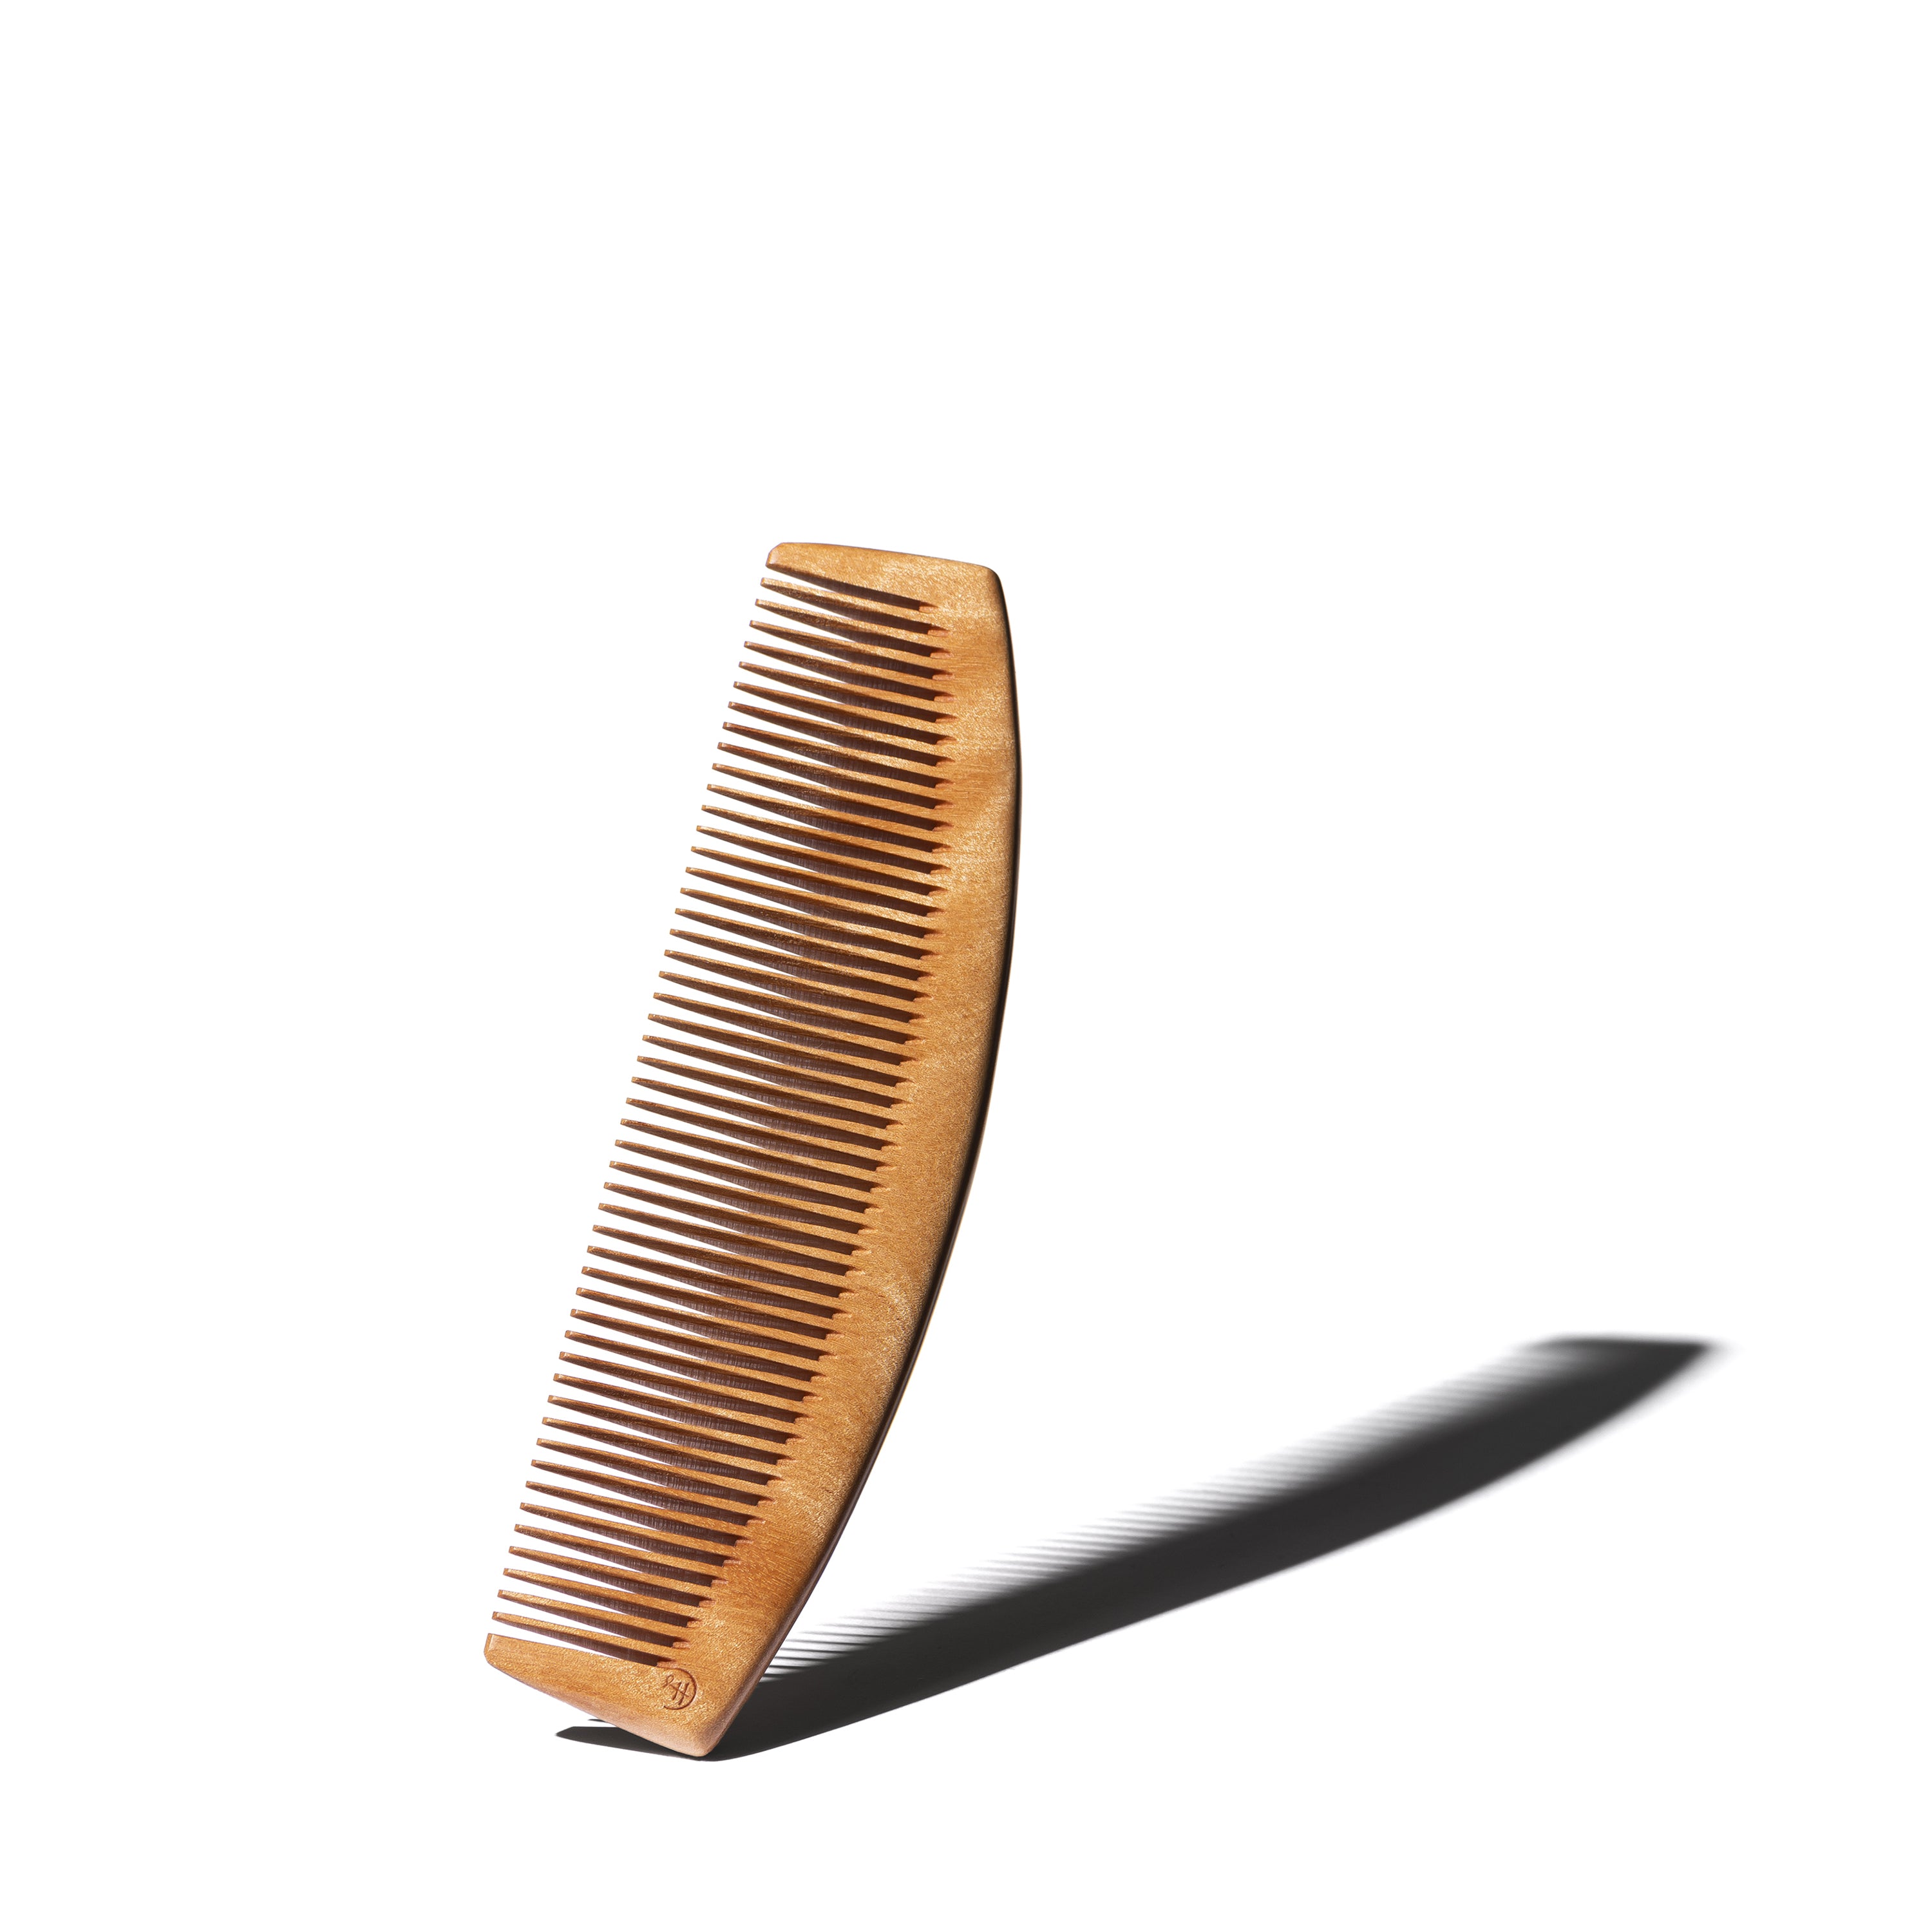 Buly 1803 - Horn-Effect Acetate Folding Comb - Very Goods